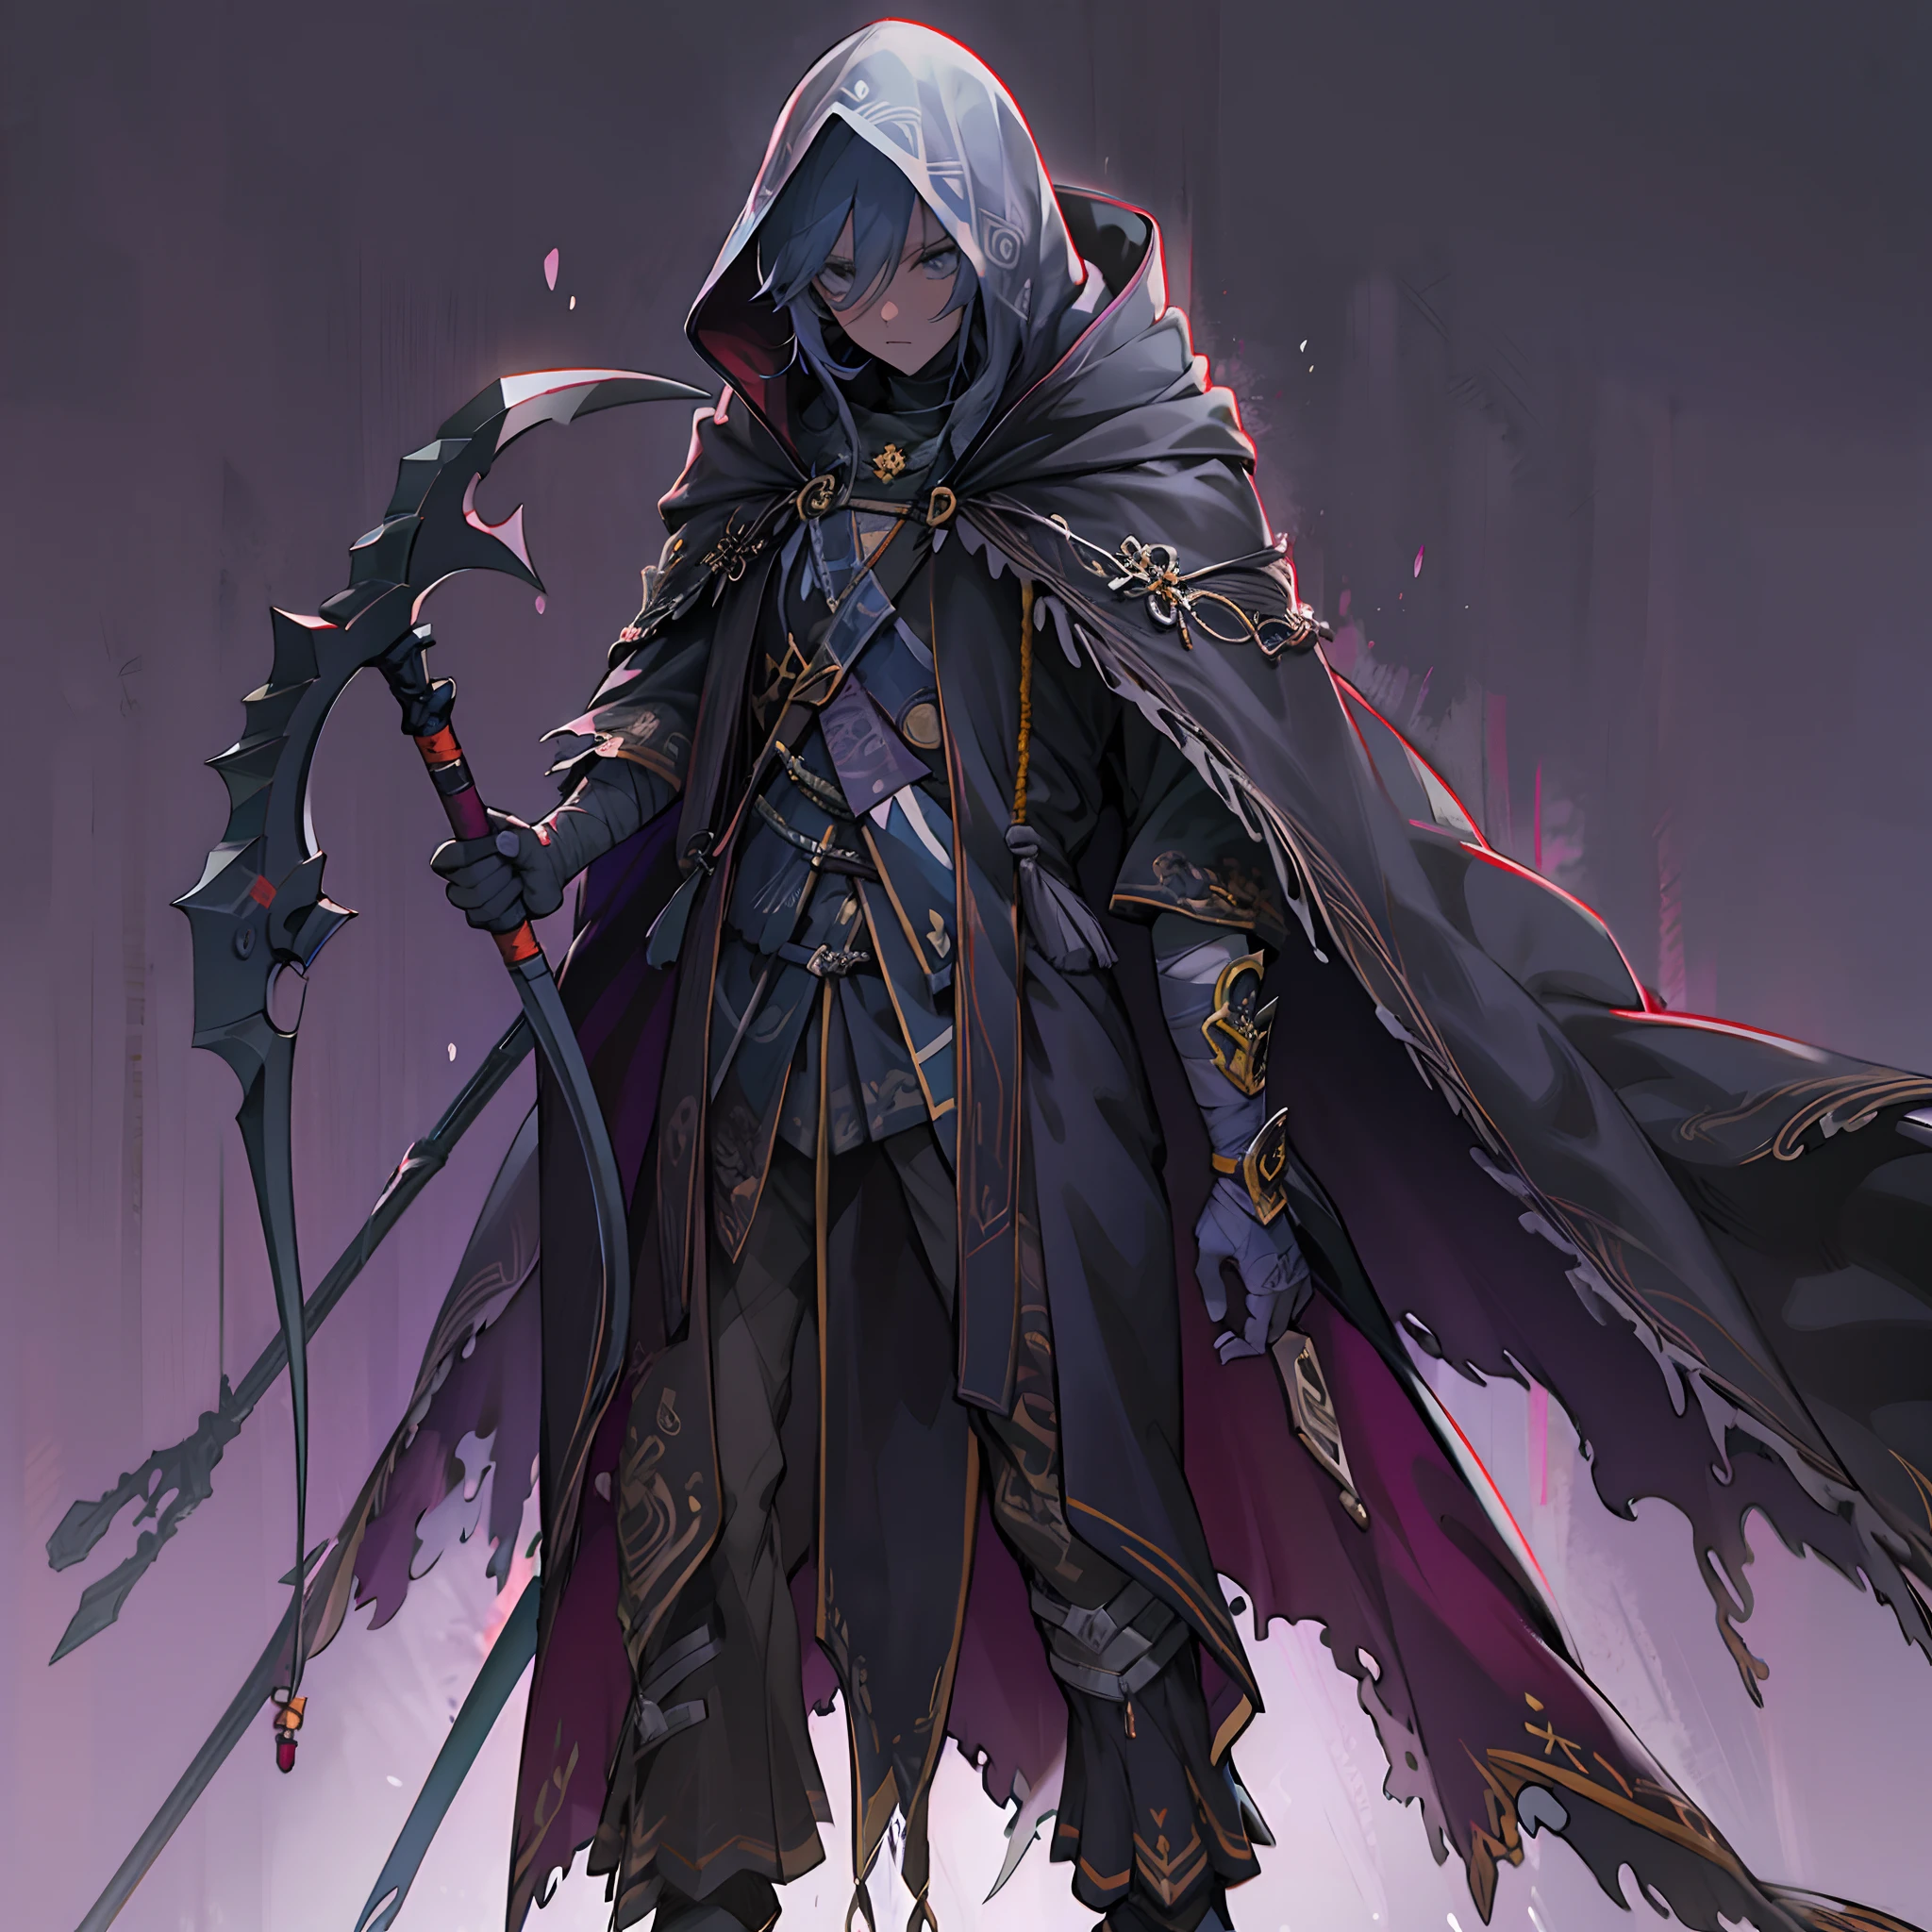 Anime artstyle, holding a scythe, wearing a stylish dark cloak, wrapped in bandages,full body,white background, wallpaper, HD quality, extremely detailed, highest quality digital art